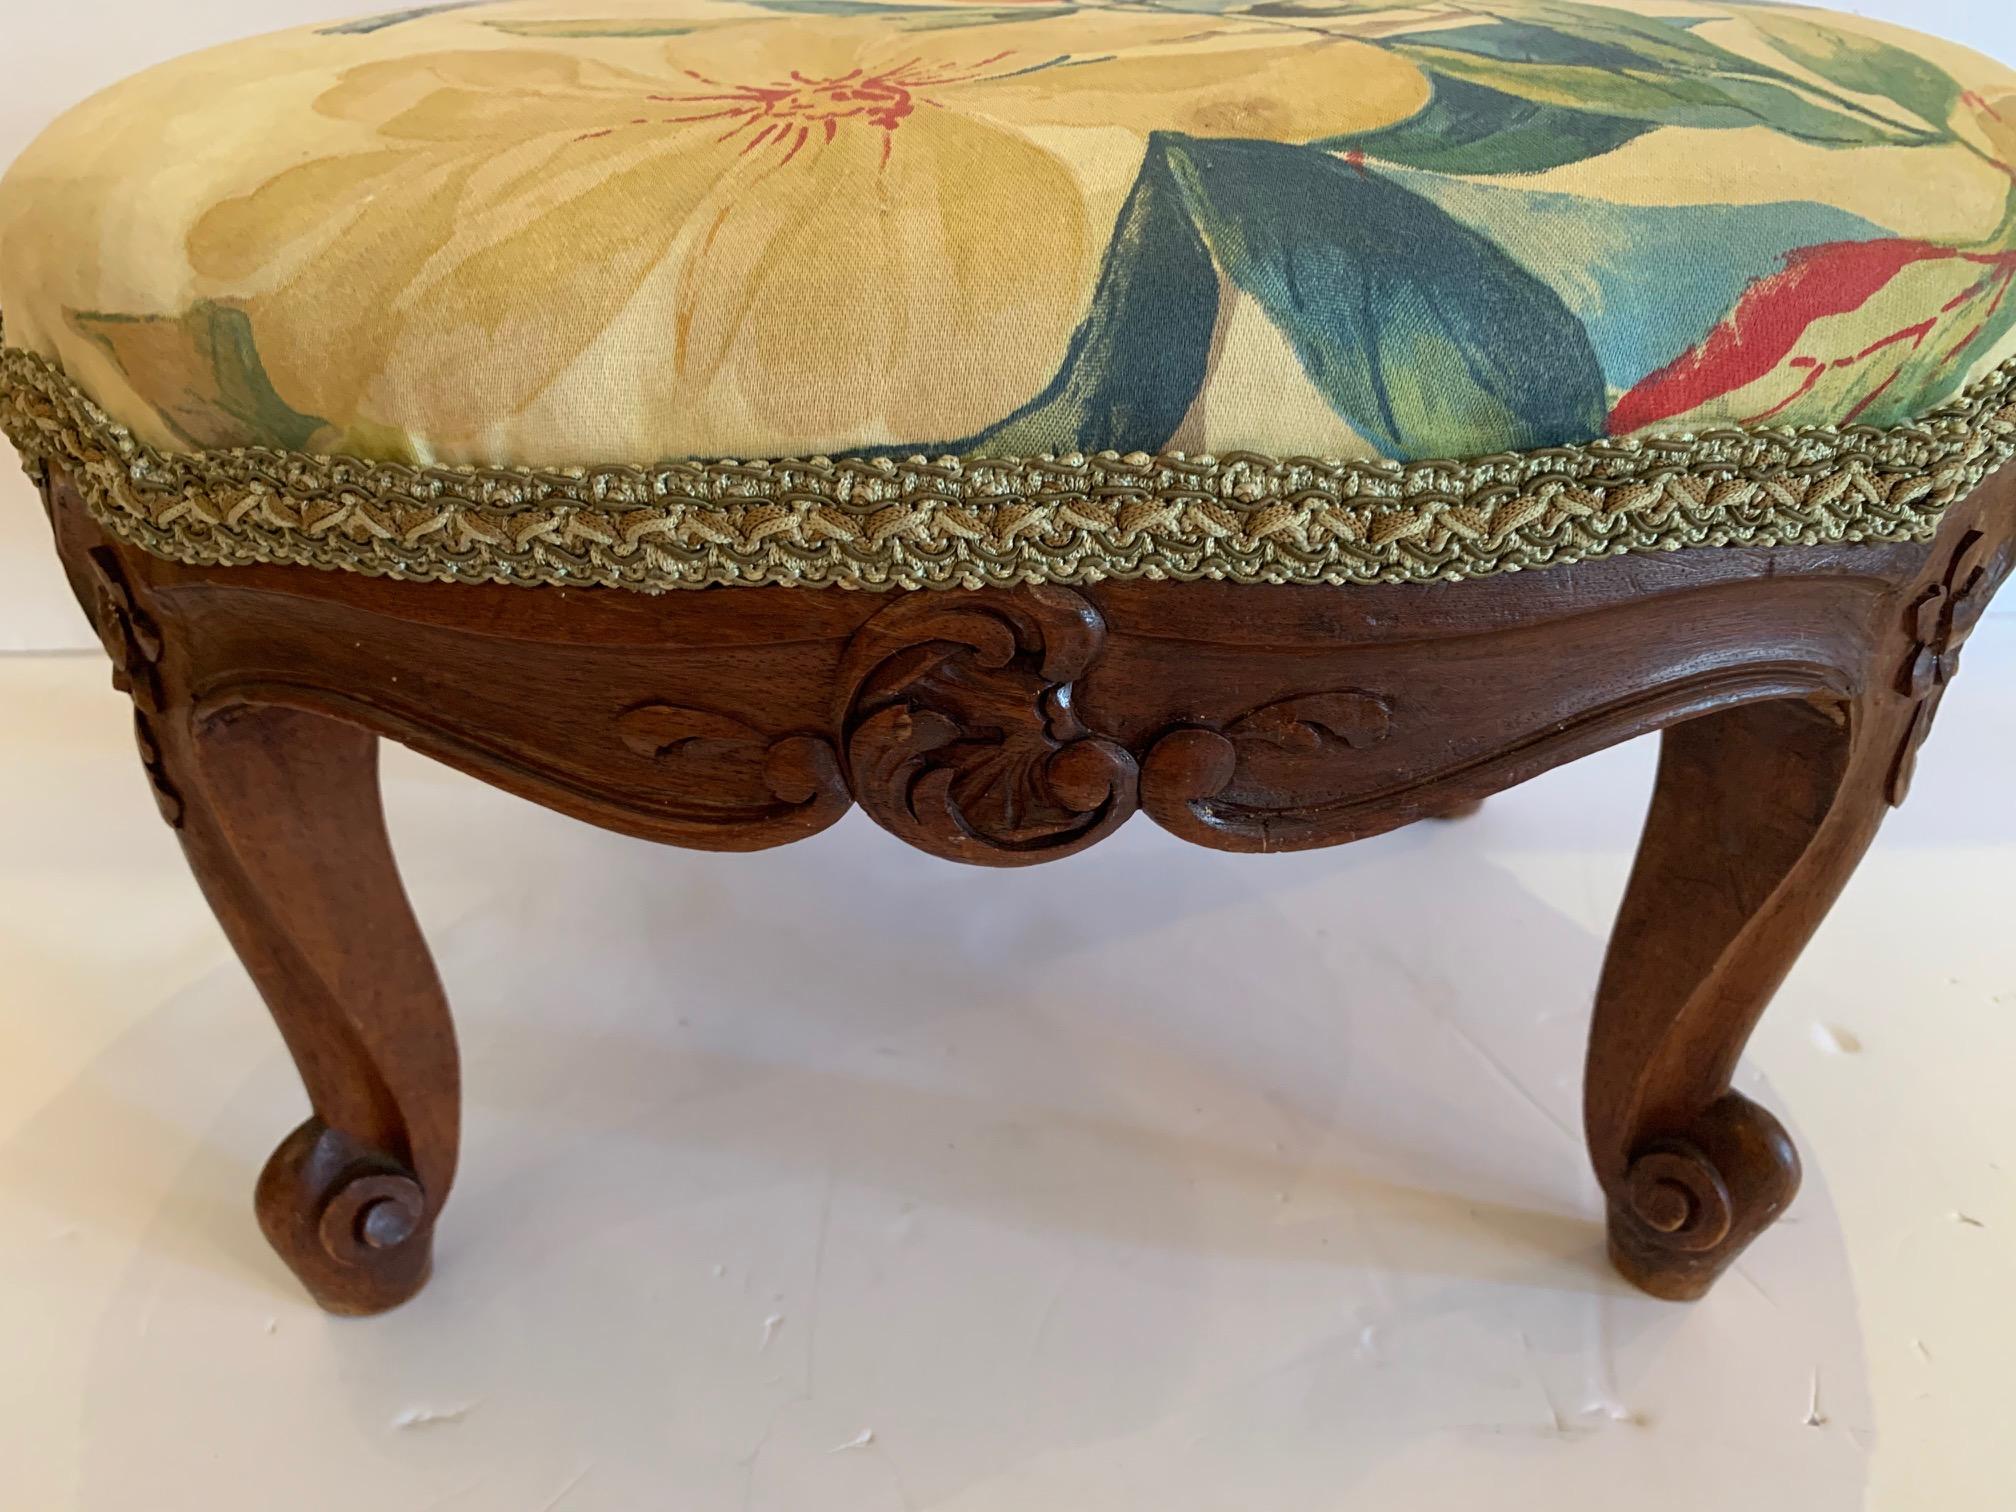 Charming French Antique Footstool Ottoman with Birds 2